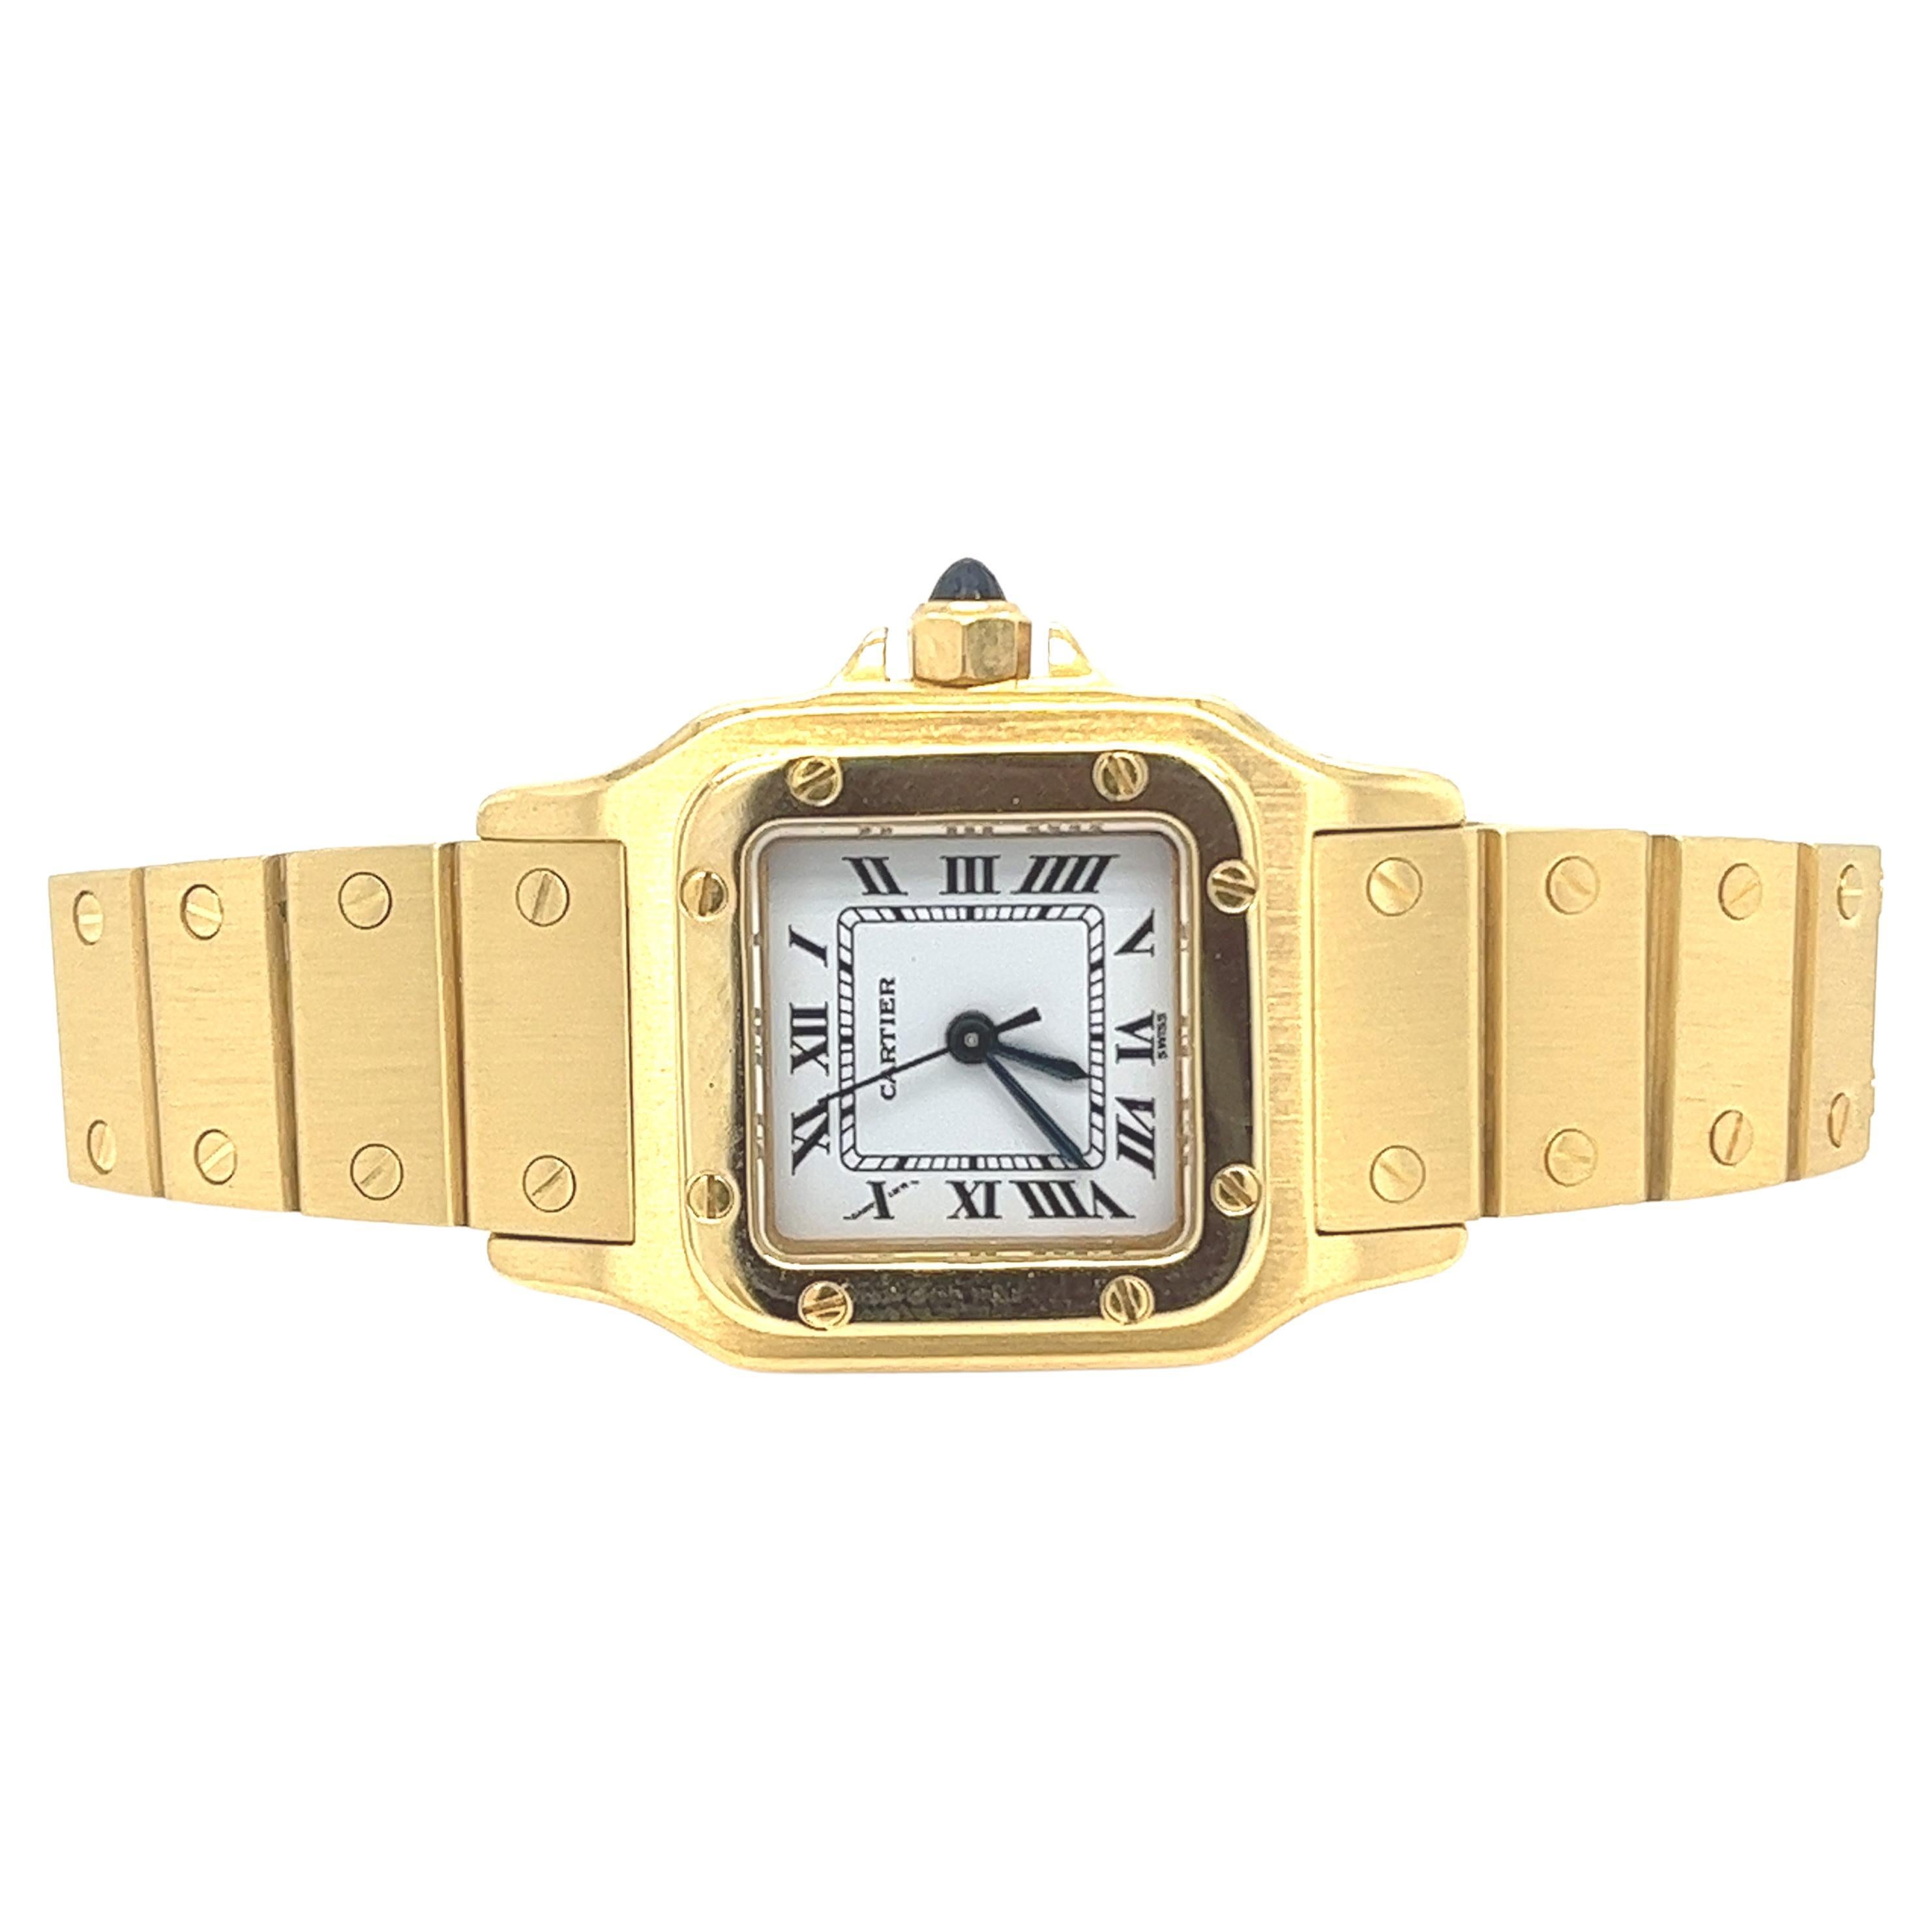 Timeless classic Cartier Santos 18 karat yellow gold automatic wrist watch for ladies.
Automatic movement wrist watch, 18 karat yellow gold case of circa 2.4 cm / 0.94 in width. White dial with black Roman numerals. Graduated Santos bracelet in 18